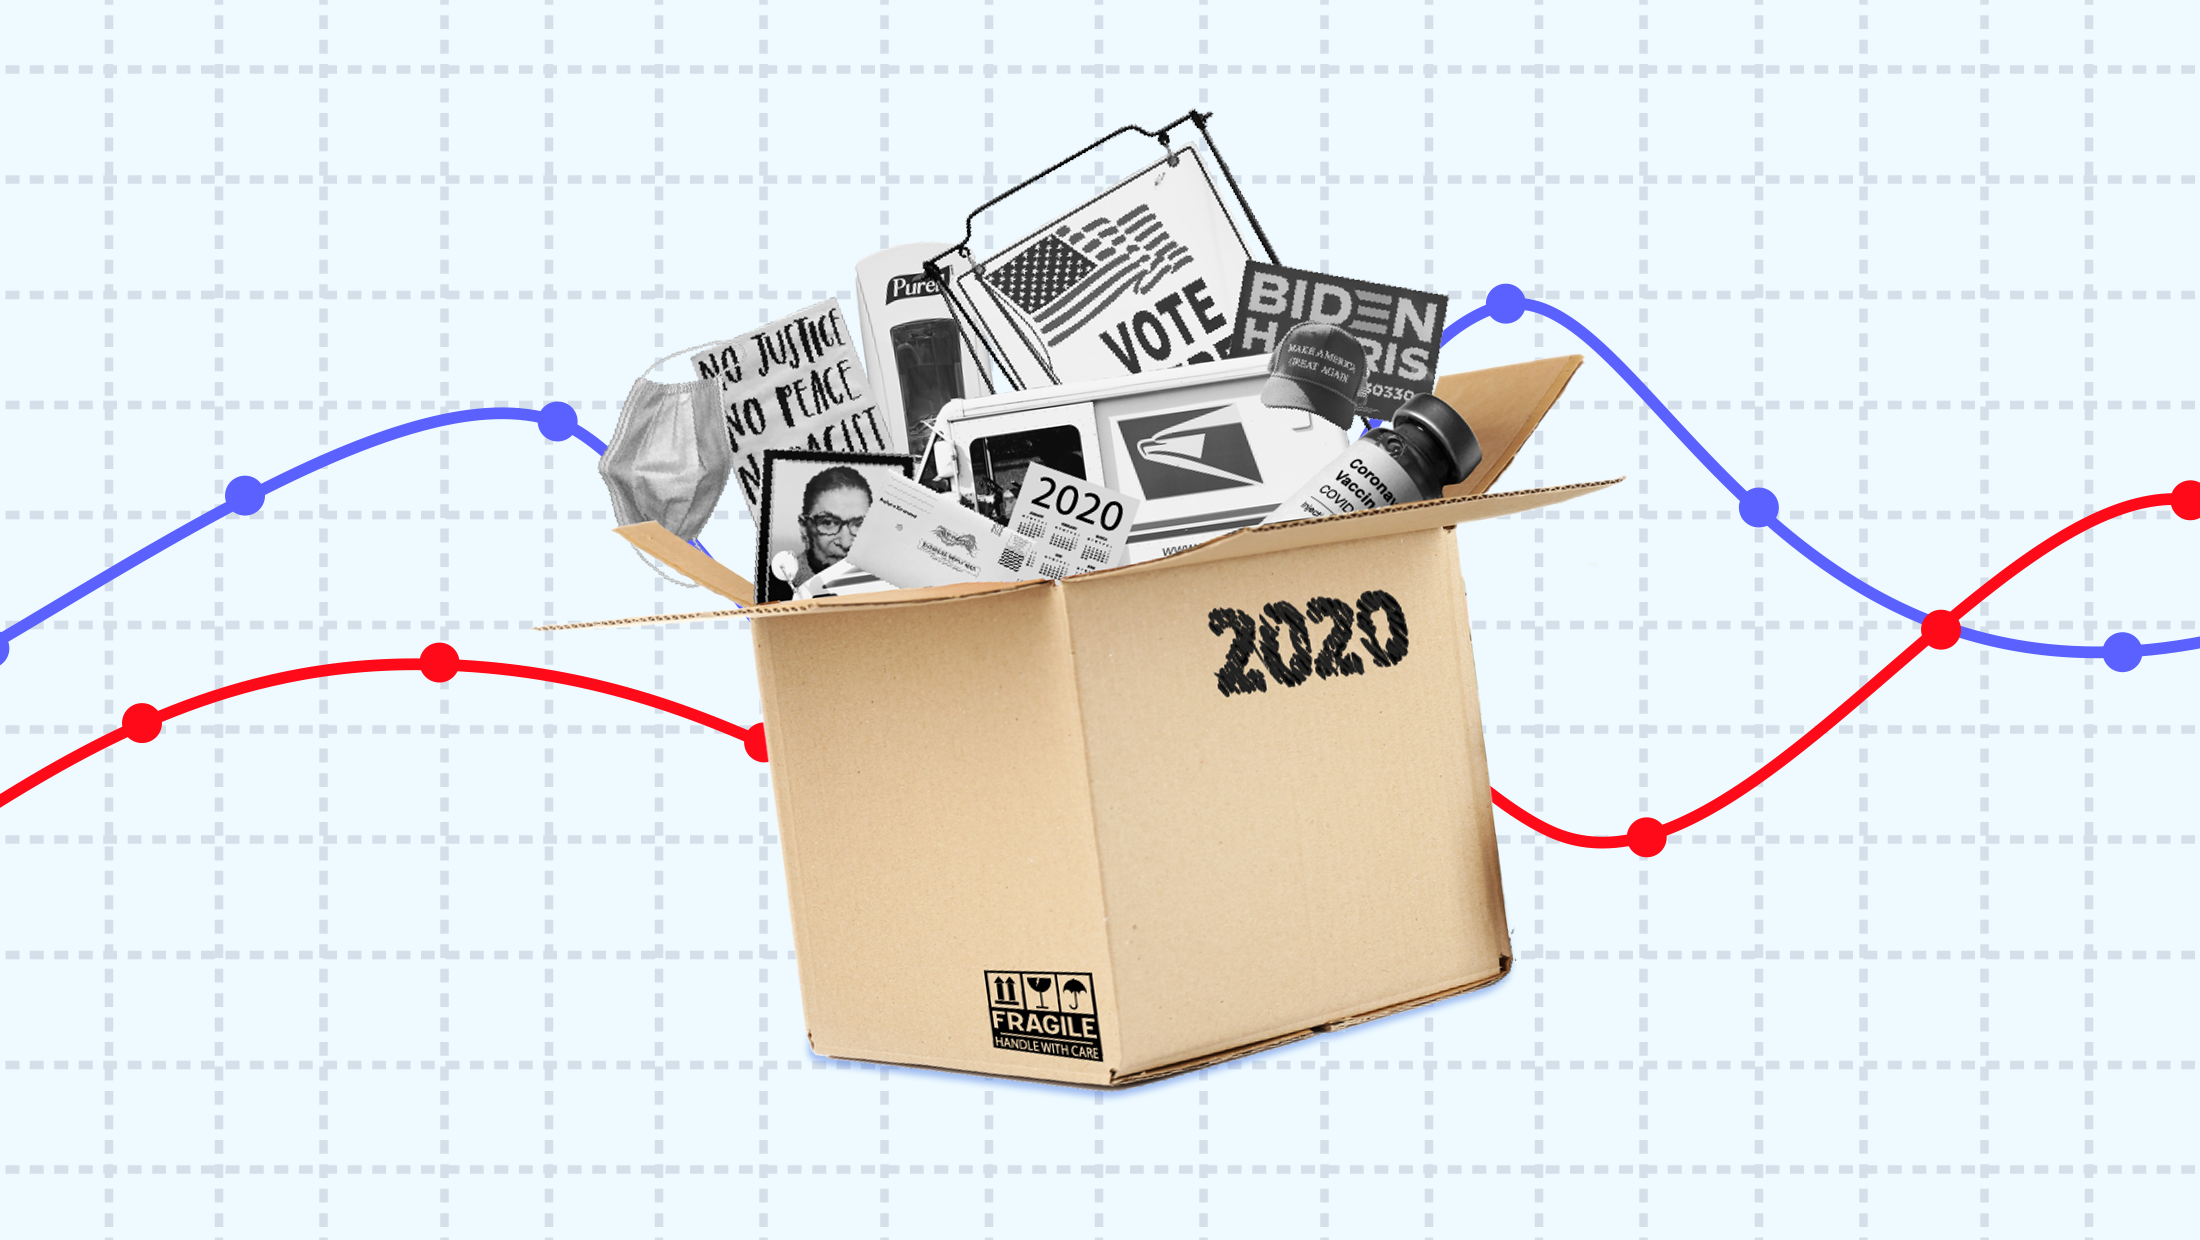 A moving box labeled "2020" with items that shaped the 2020 election including a USPS truck, a "VOTE" sign, a framed photo of RBG, a mask, a vile of the COVID-19 vaccine and more, mounted on a piece of graph paper with various data points